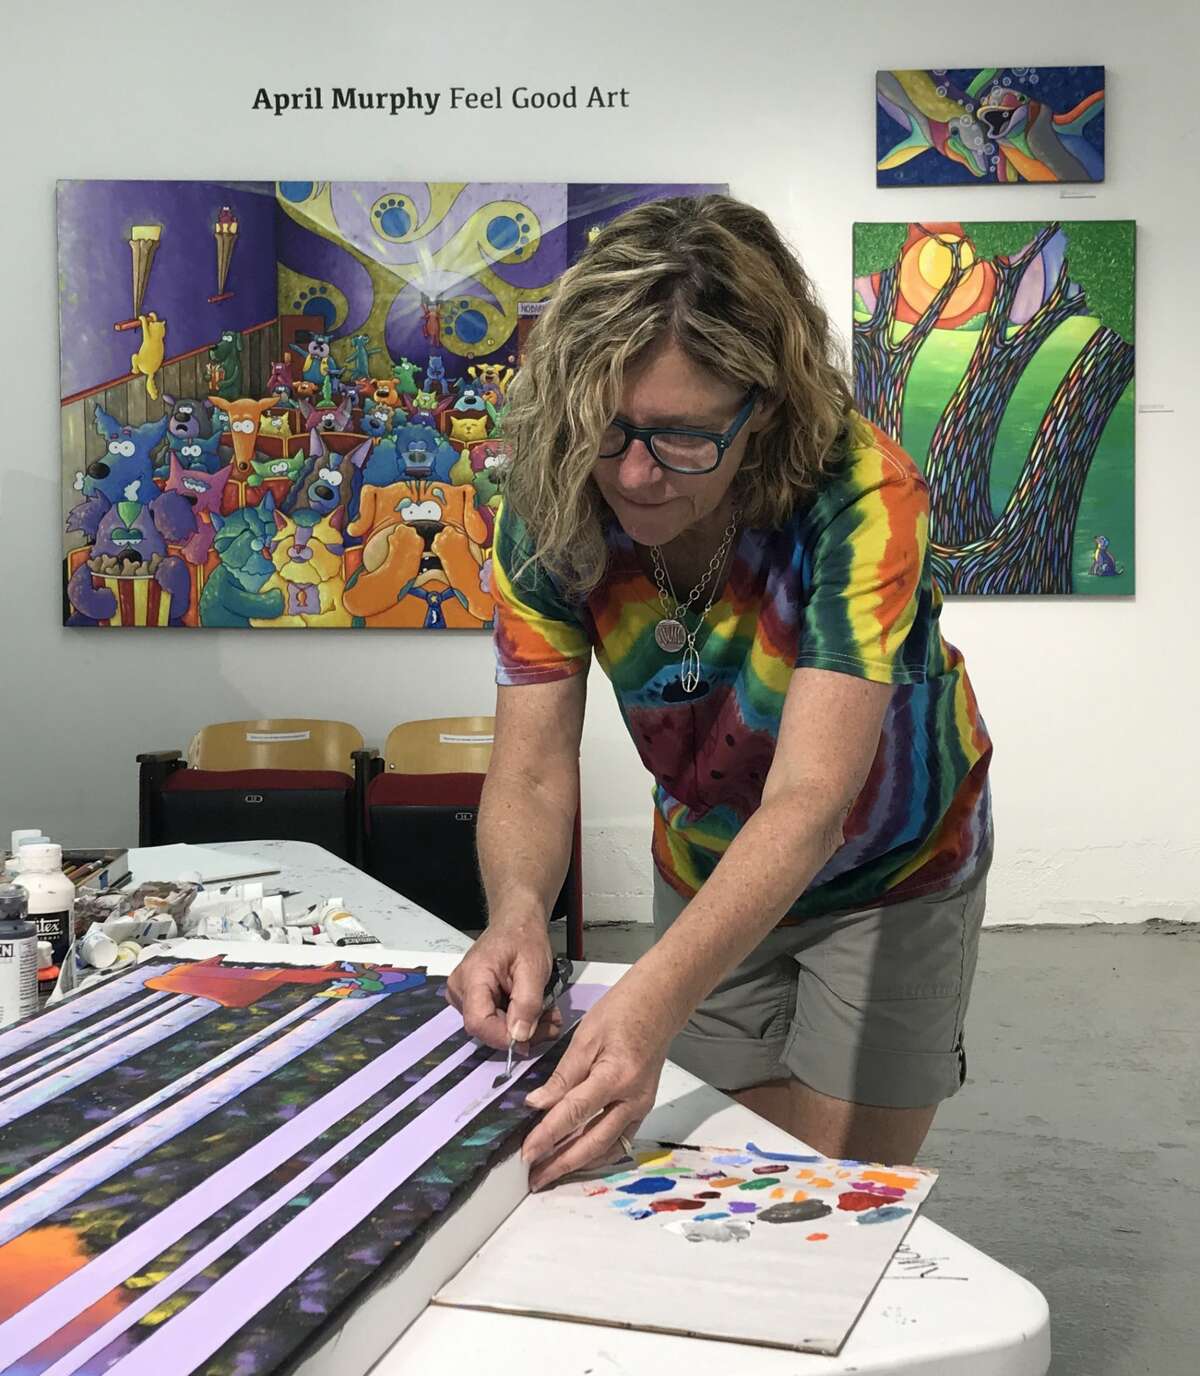 Murphy, a full-time artist in Houston, started her career as a painter in 2009. "The biggest thrill is when visitors walk into my studio at Winter Street or into my tent at an art festival and their mood visibly lifts before my eyes! That never gets old seeing that my art can do that for people."